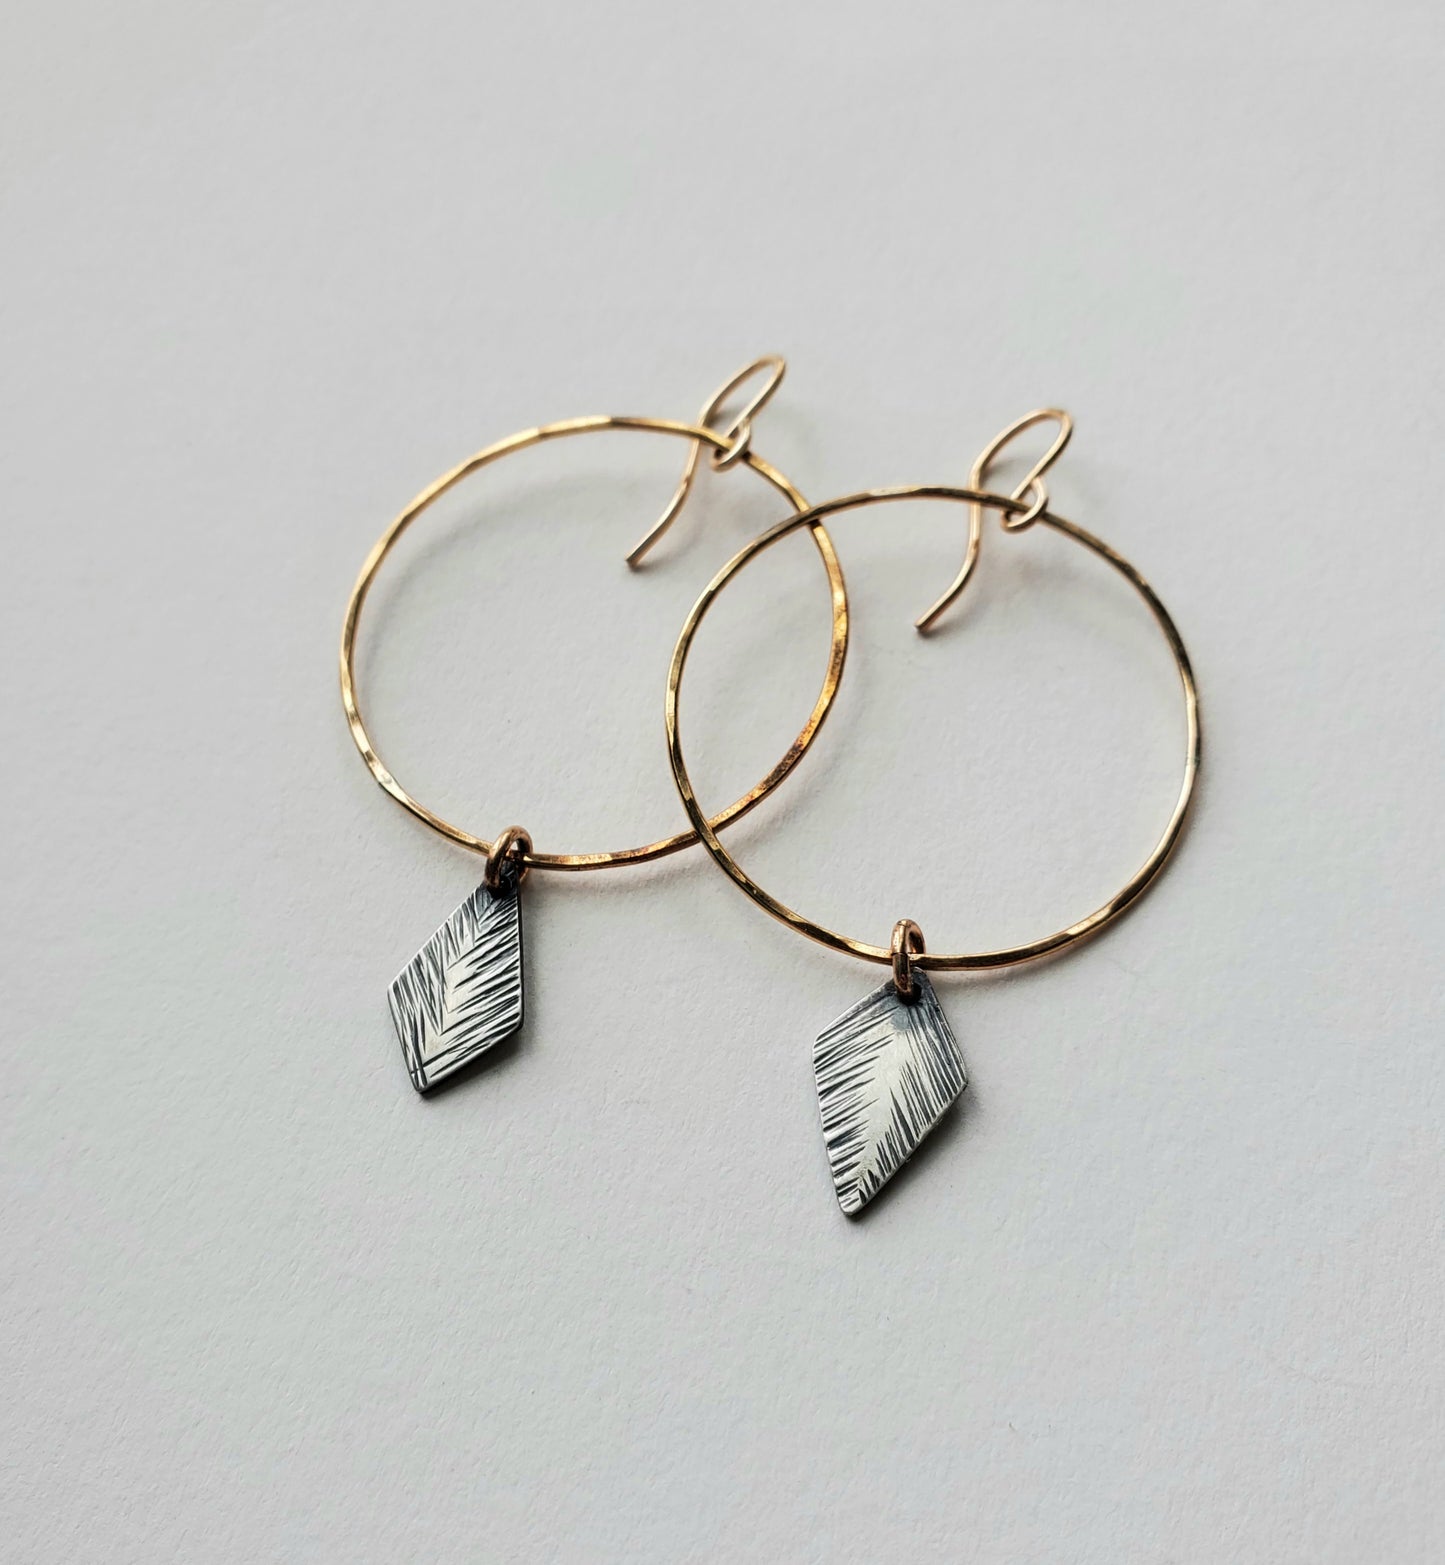 North/South Node Earrings